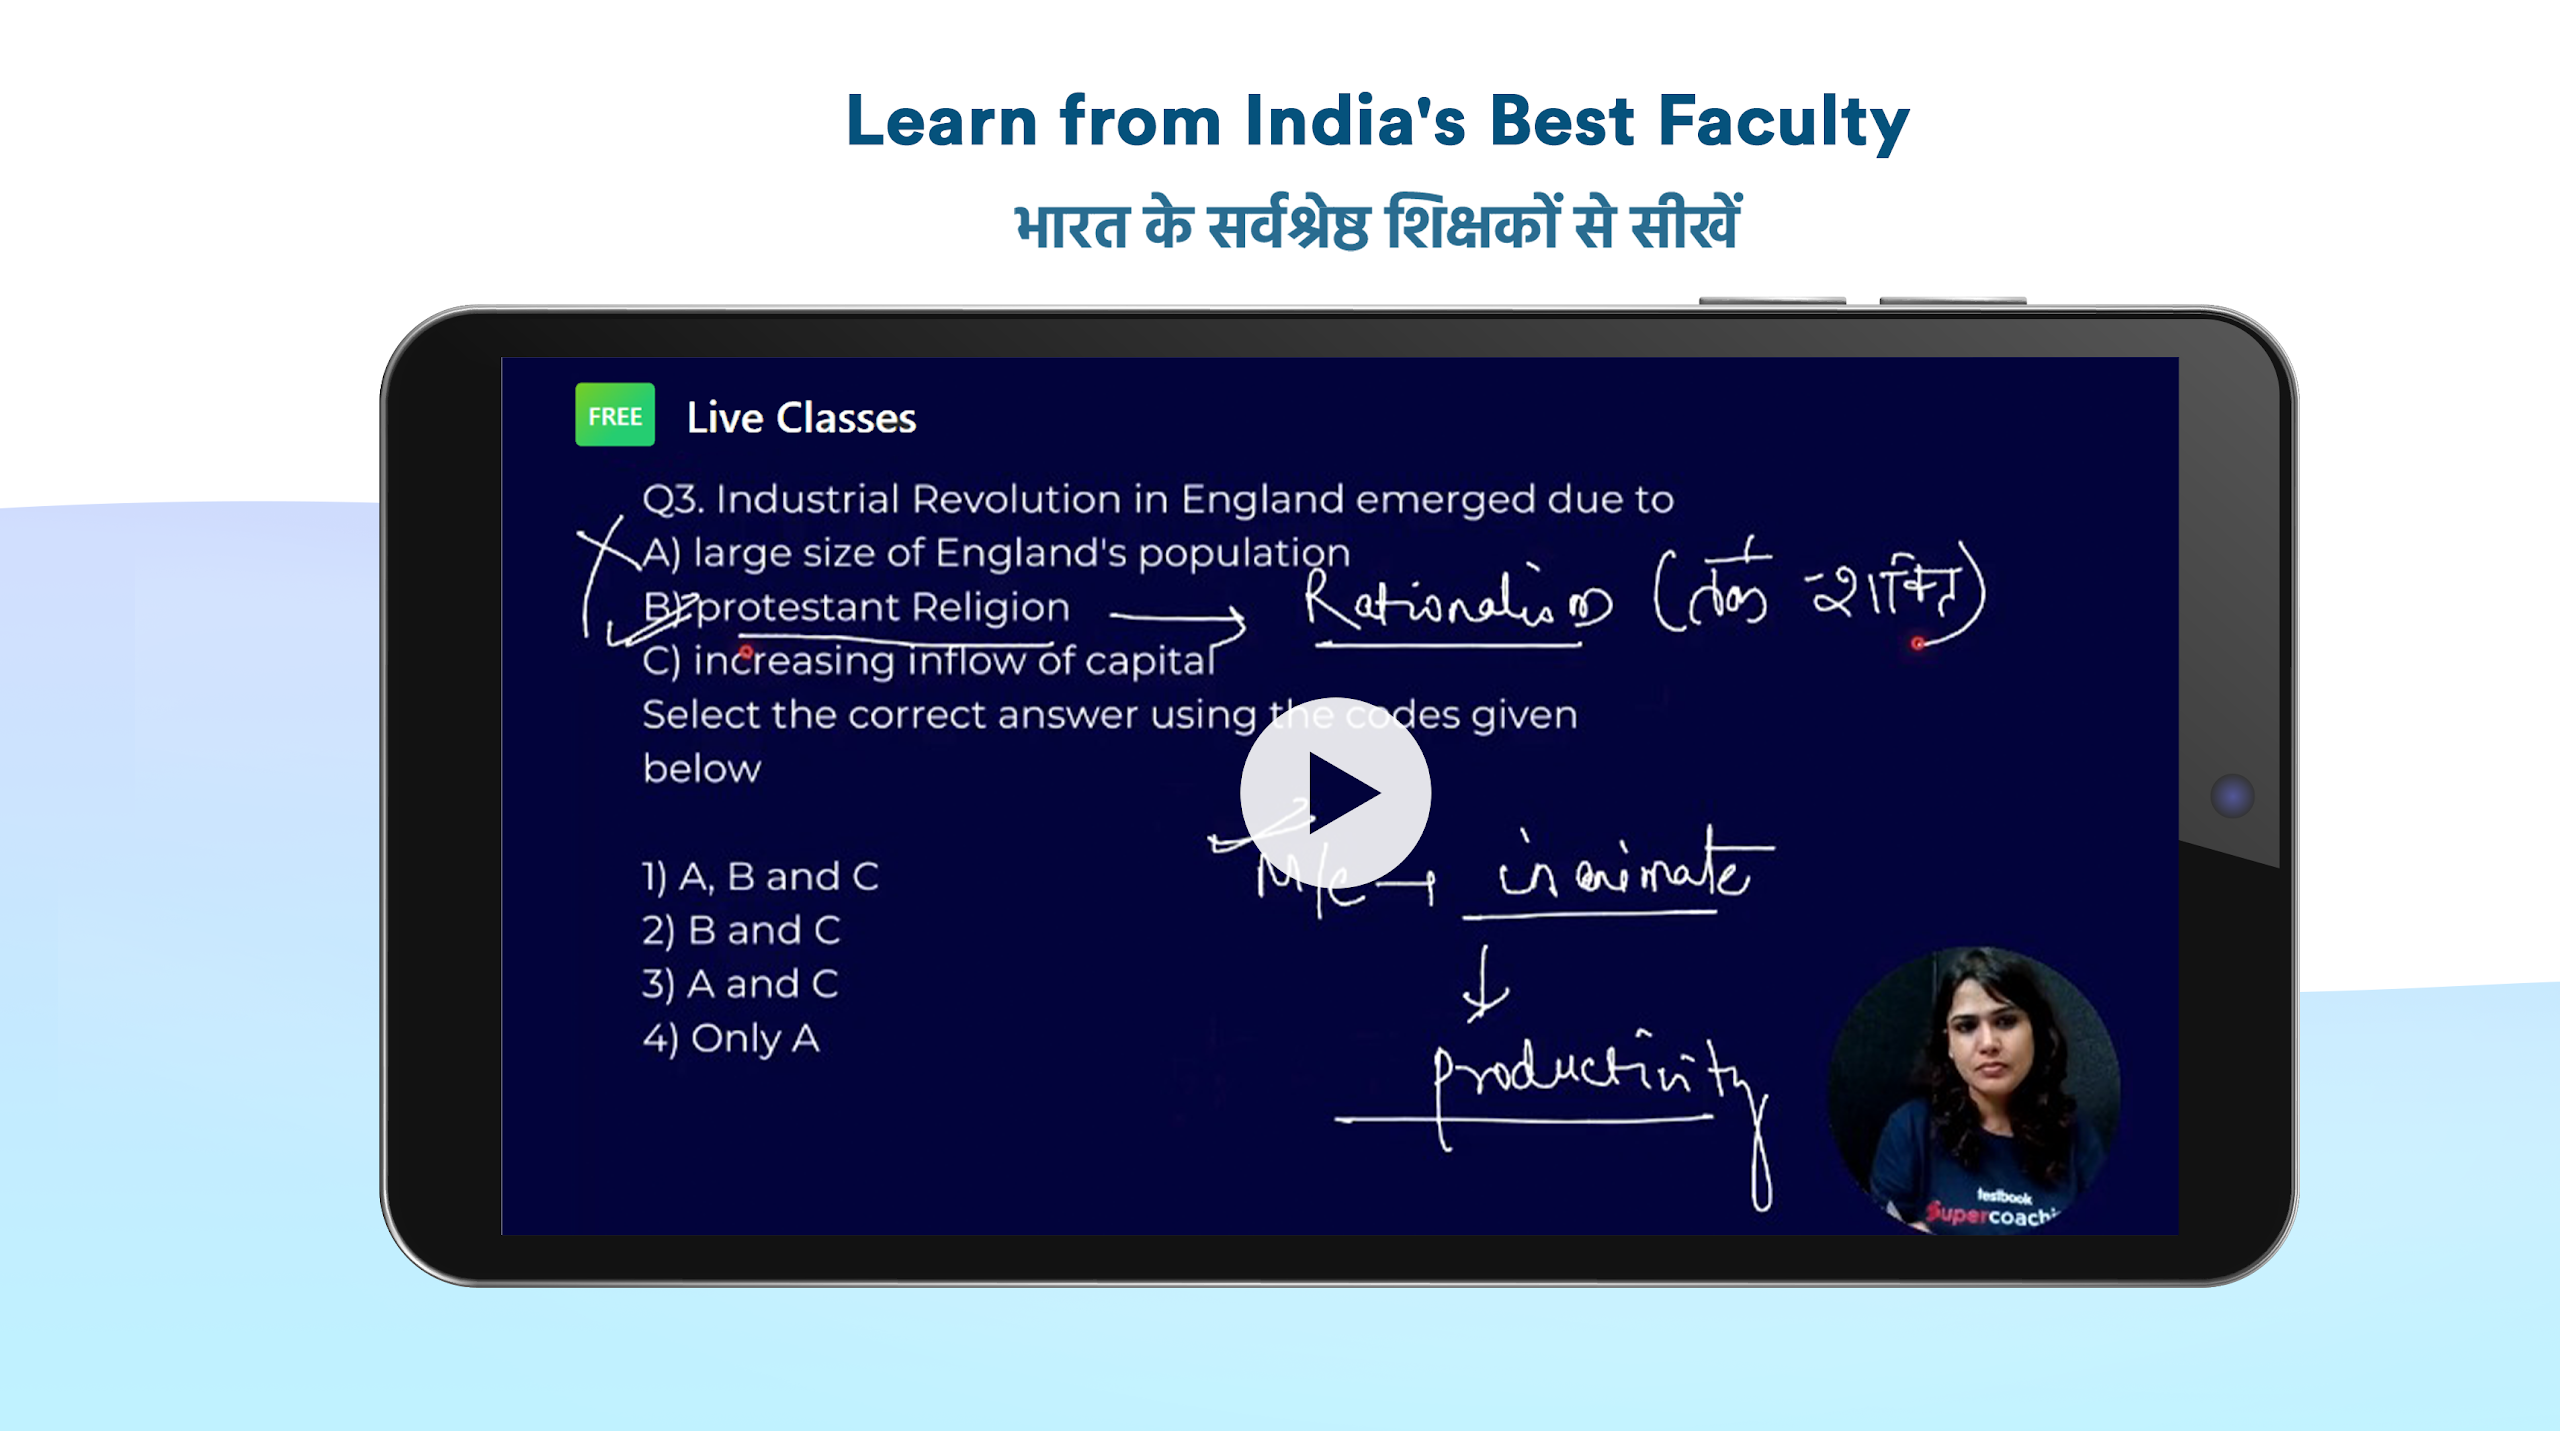 India's Best Faculty